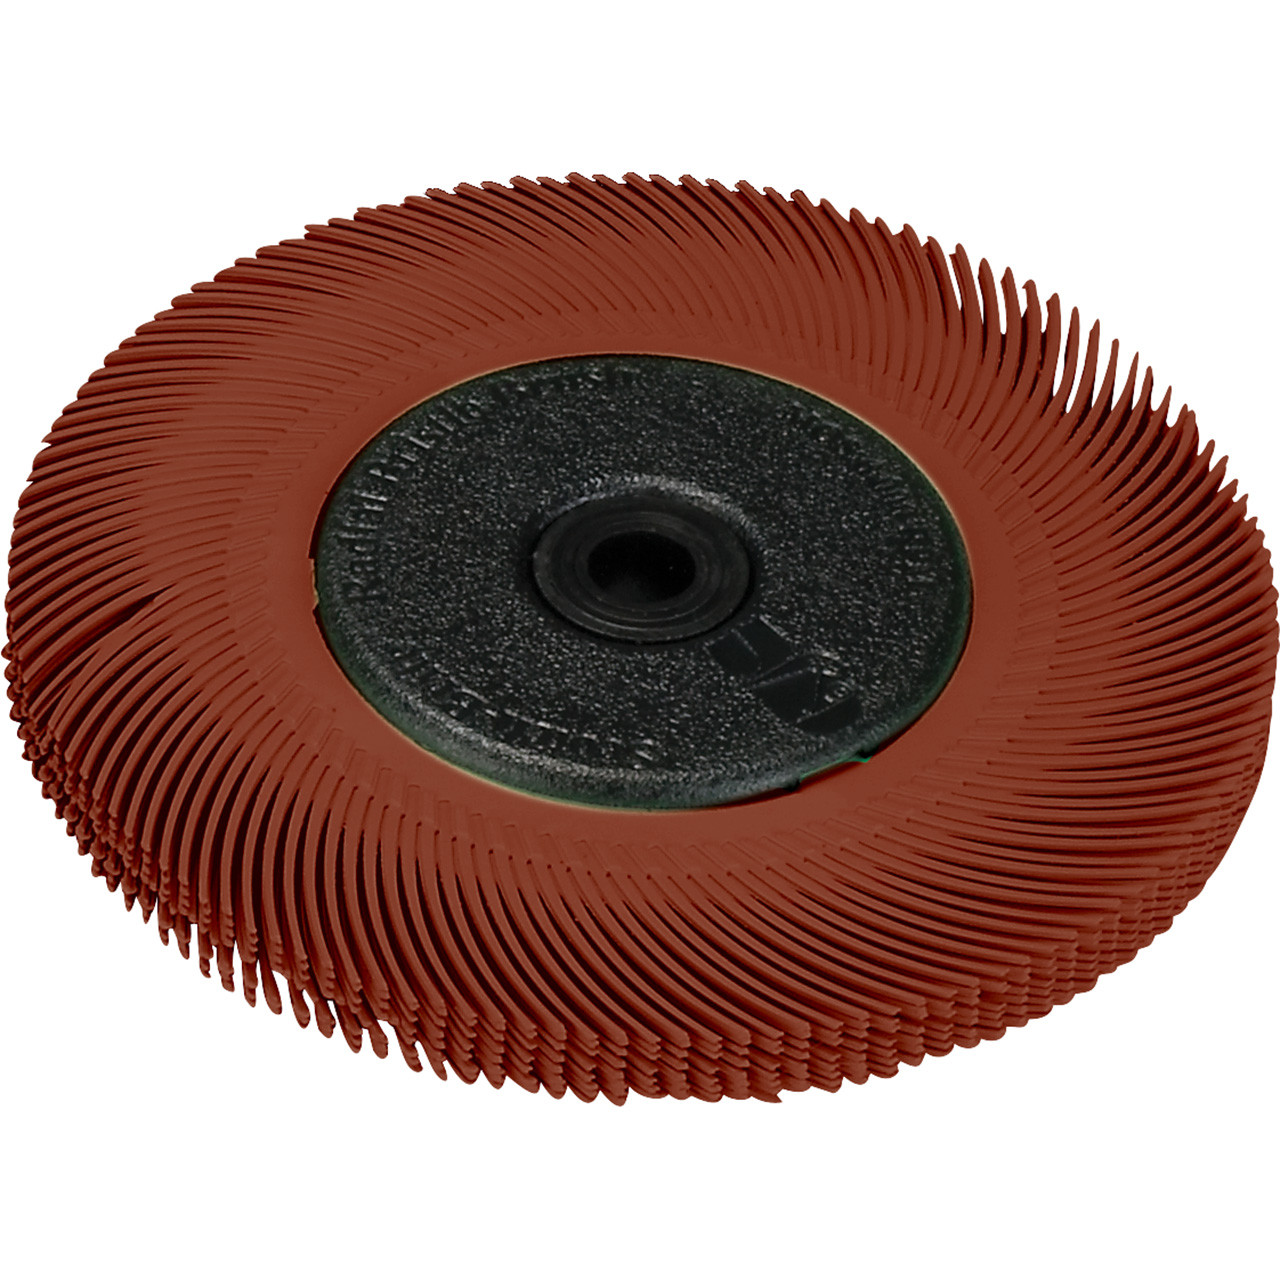 3M™ Radial Bristle Discs 6" 8-Ply, Red (220 grit)